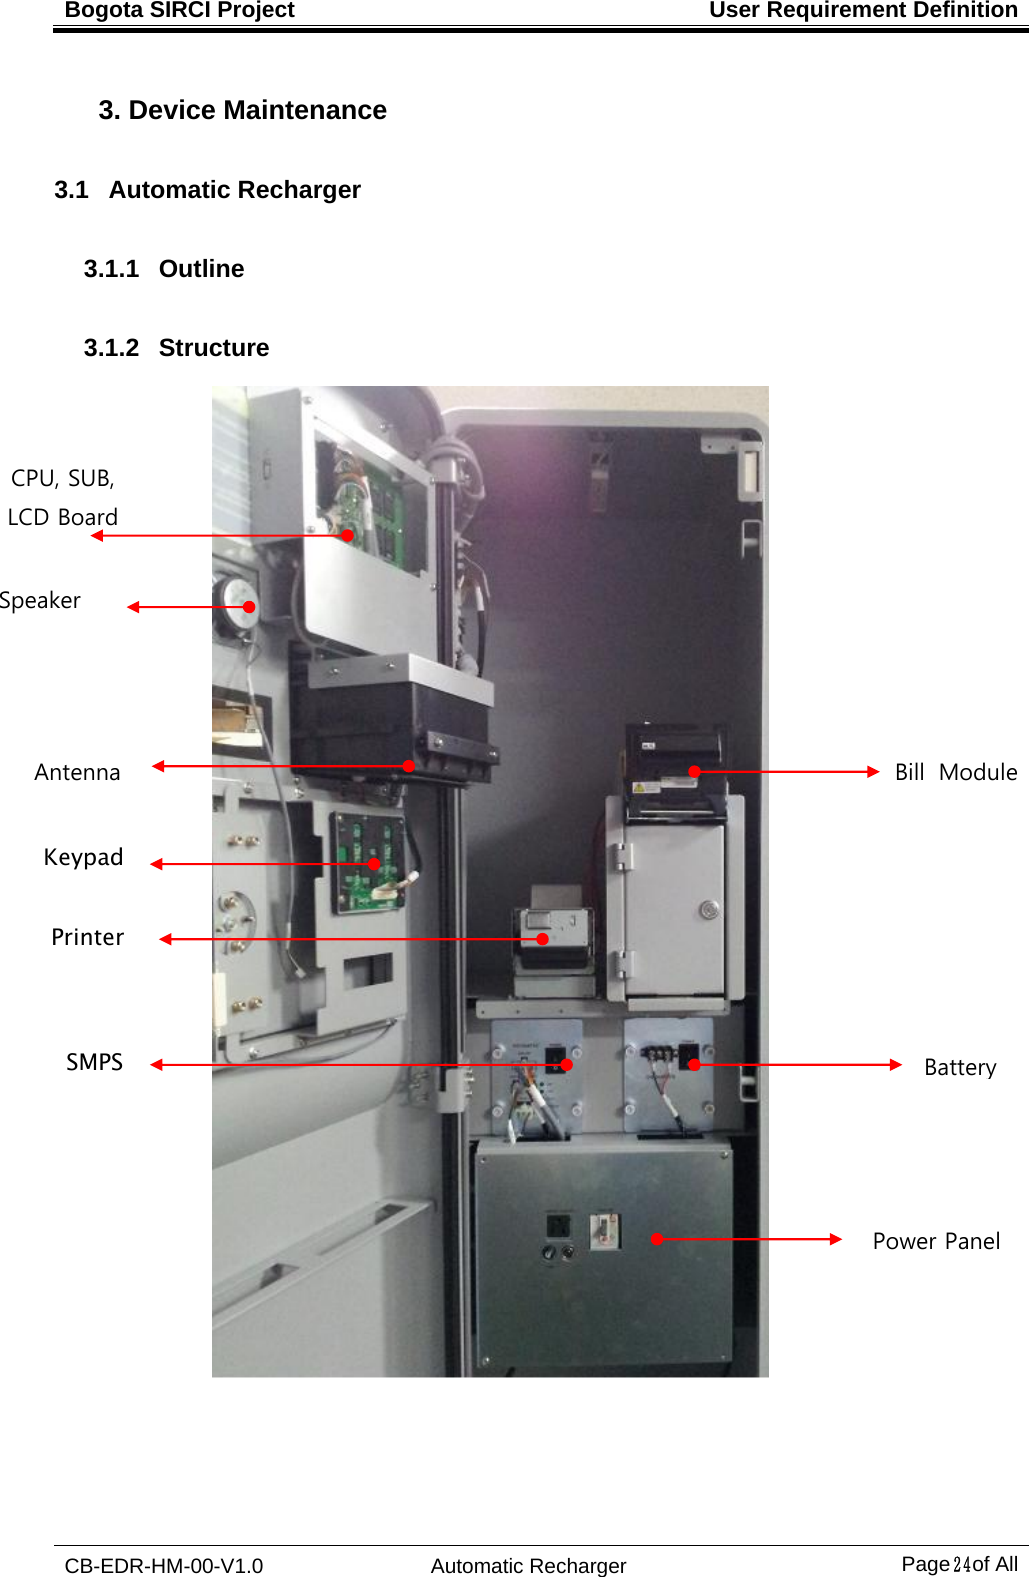 Bogota SIRCI Project  User Requirement Definition CB-EDR-HM-00-V1.0 Automatic Recharger Page２４ of All 3. Device Maintenance 3.1   Automatic Recharger 3.1.1  Outline 3.1.2  Structure       Bill  Module Battery Power Panel Antenna Keypad Printer SMPS CPU, SUB, LCD Board Speaker  